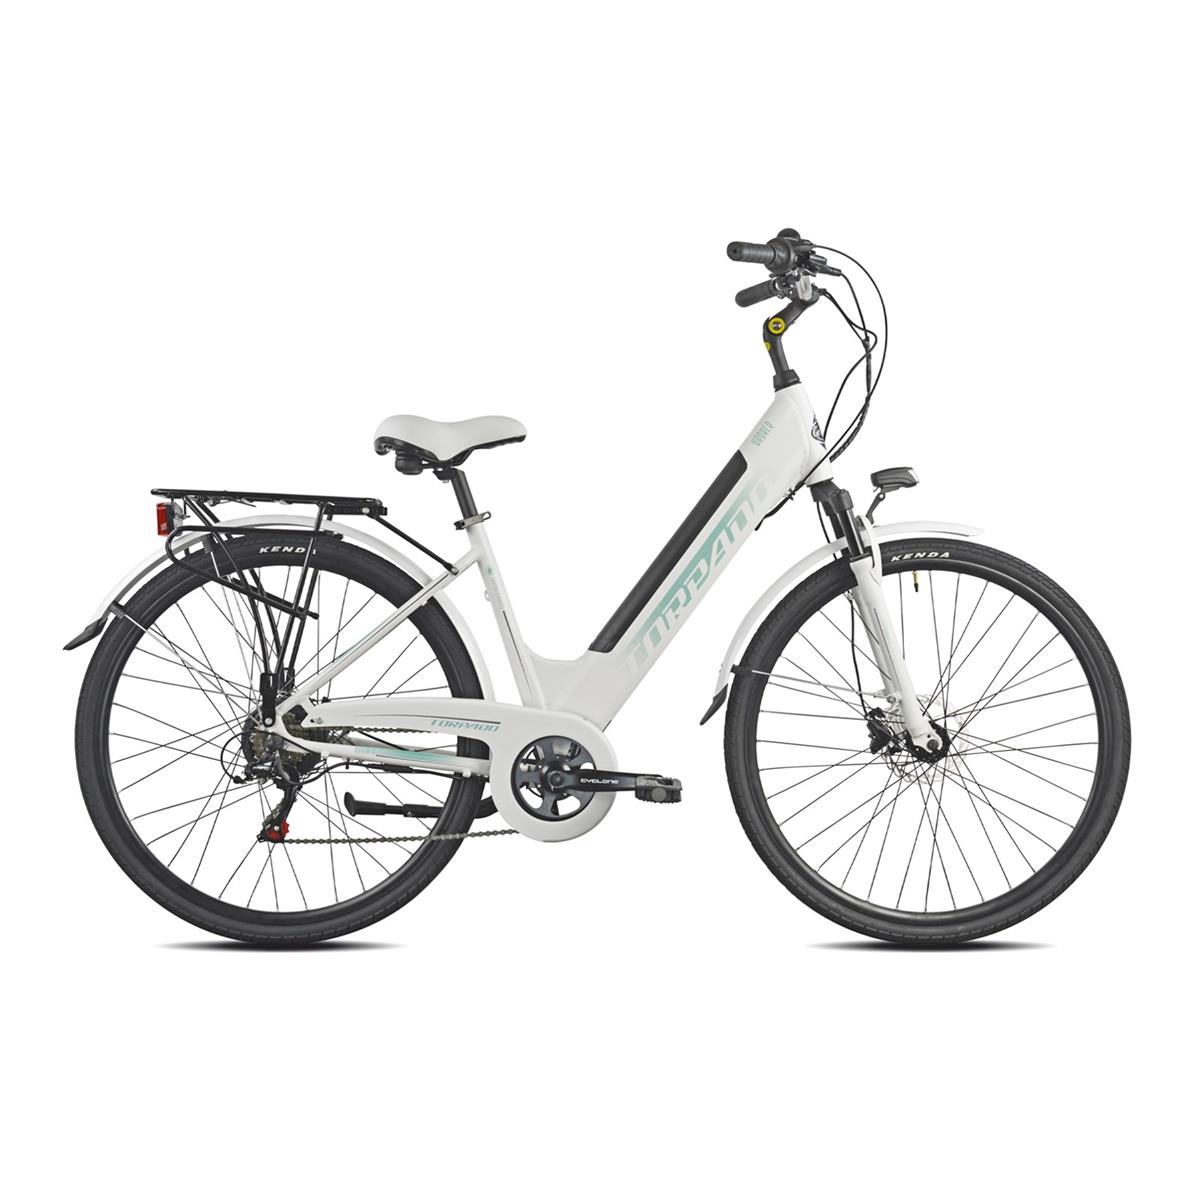 Venere T268 28'' 7s 468Wh Bafang White One Size